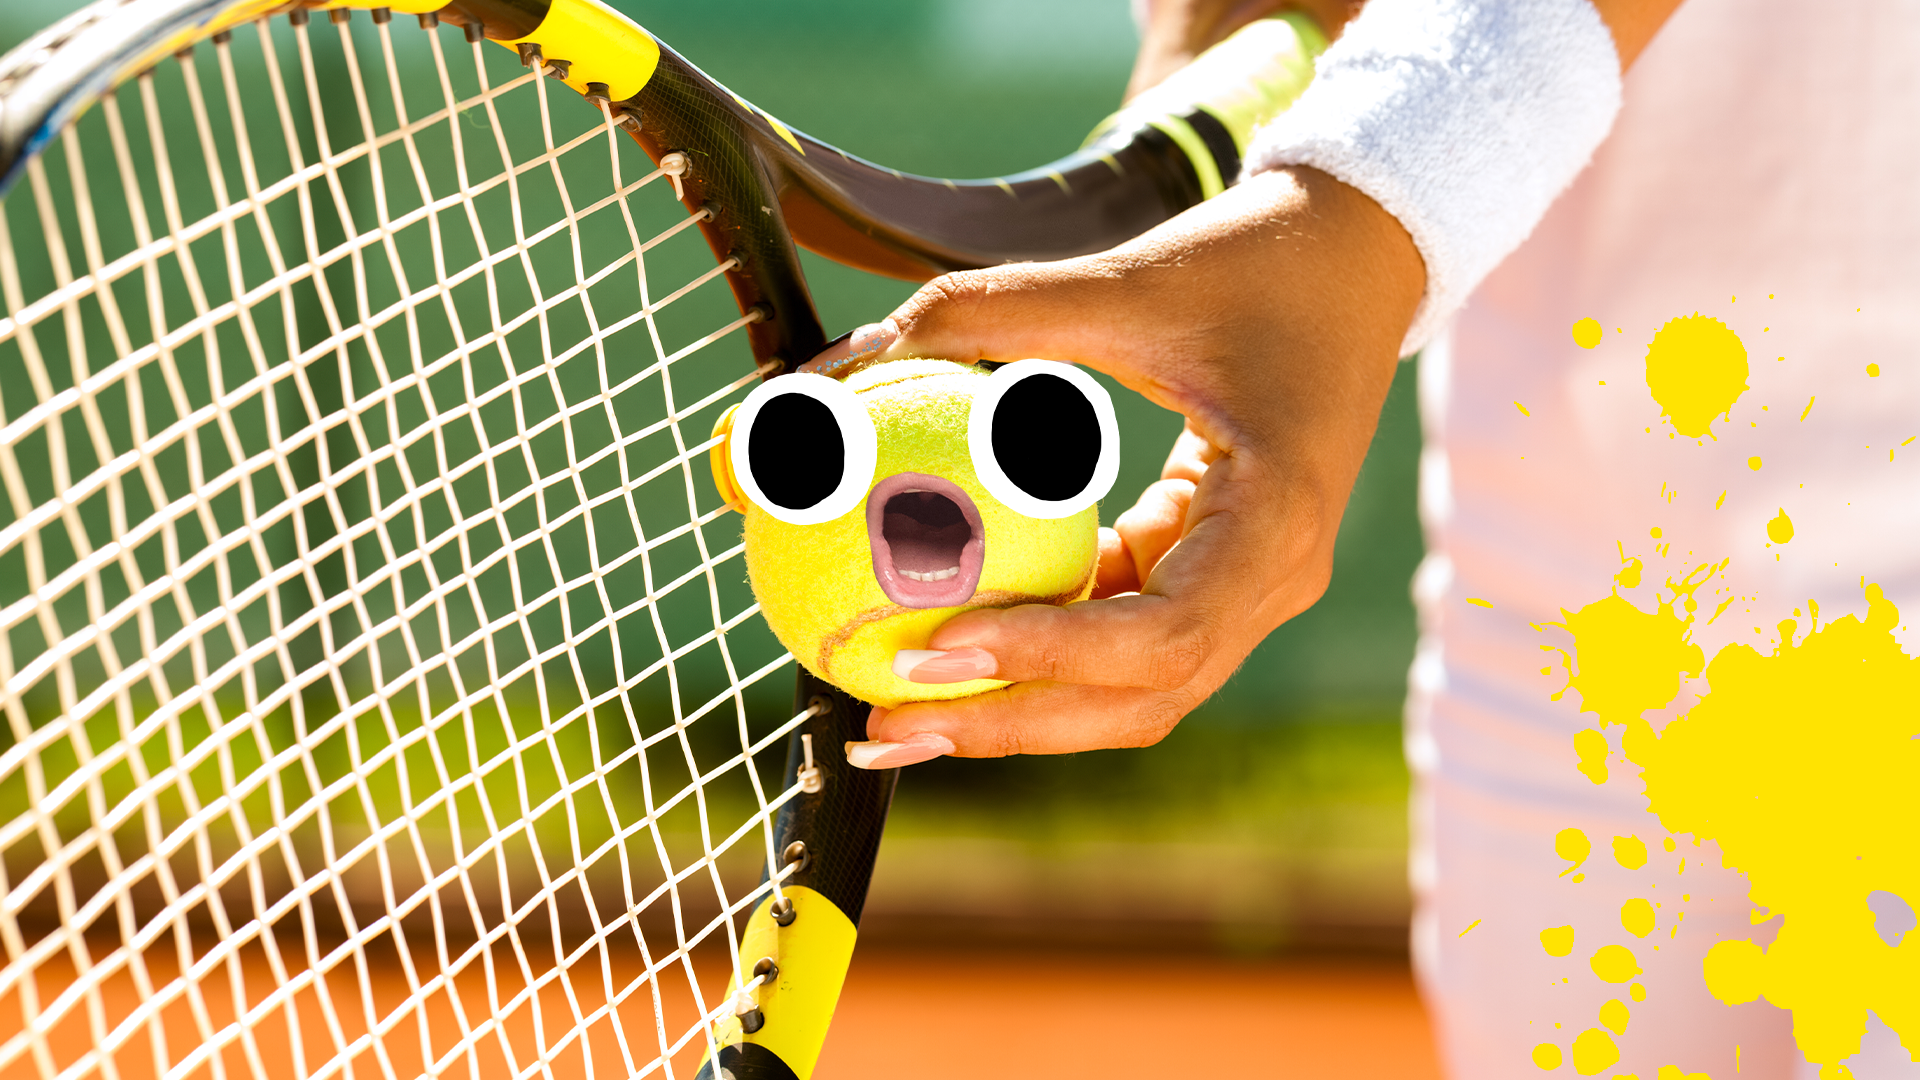 Hand with tennis racket and ball with goofy face and splats